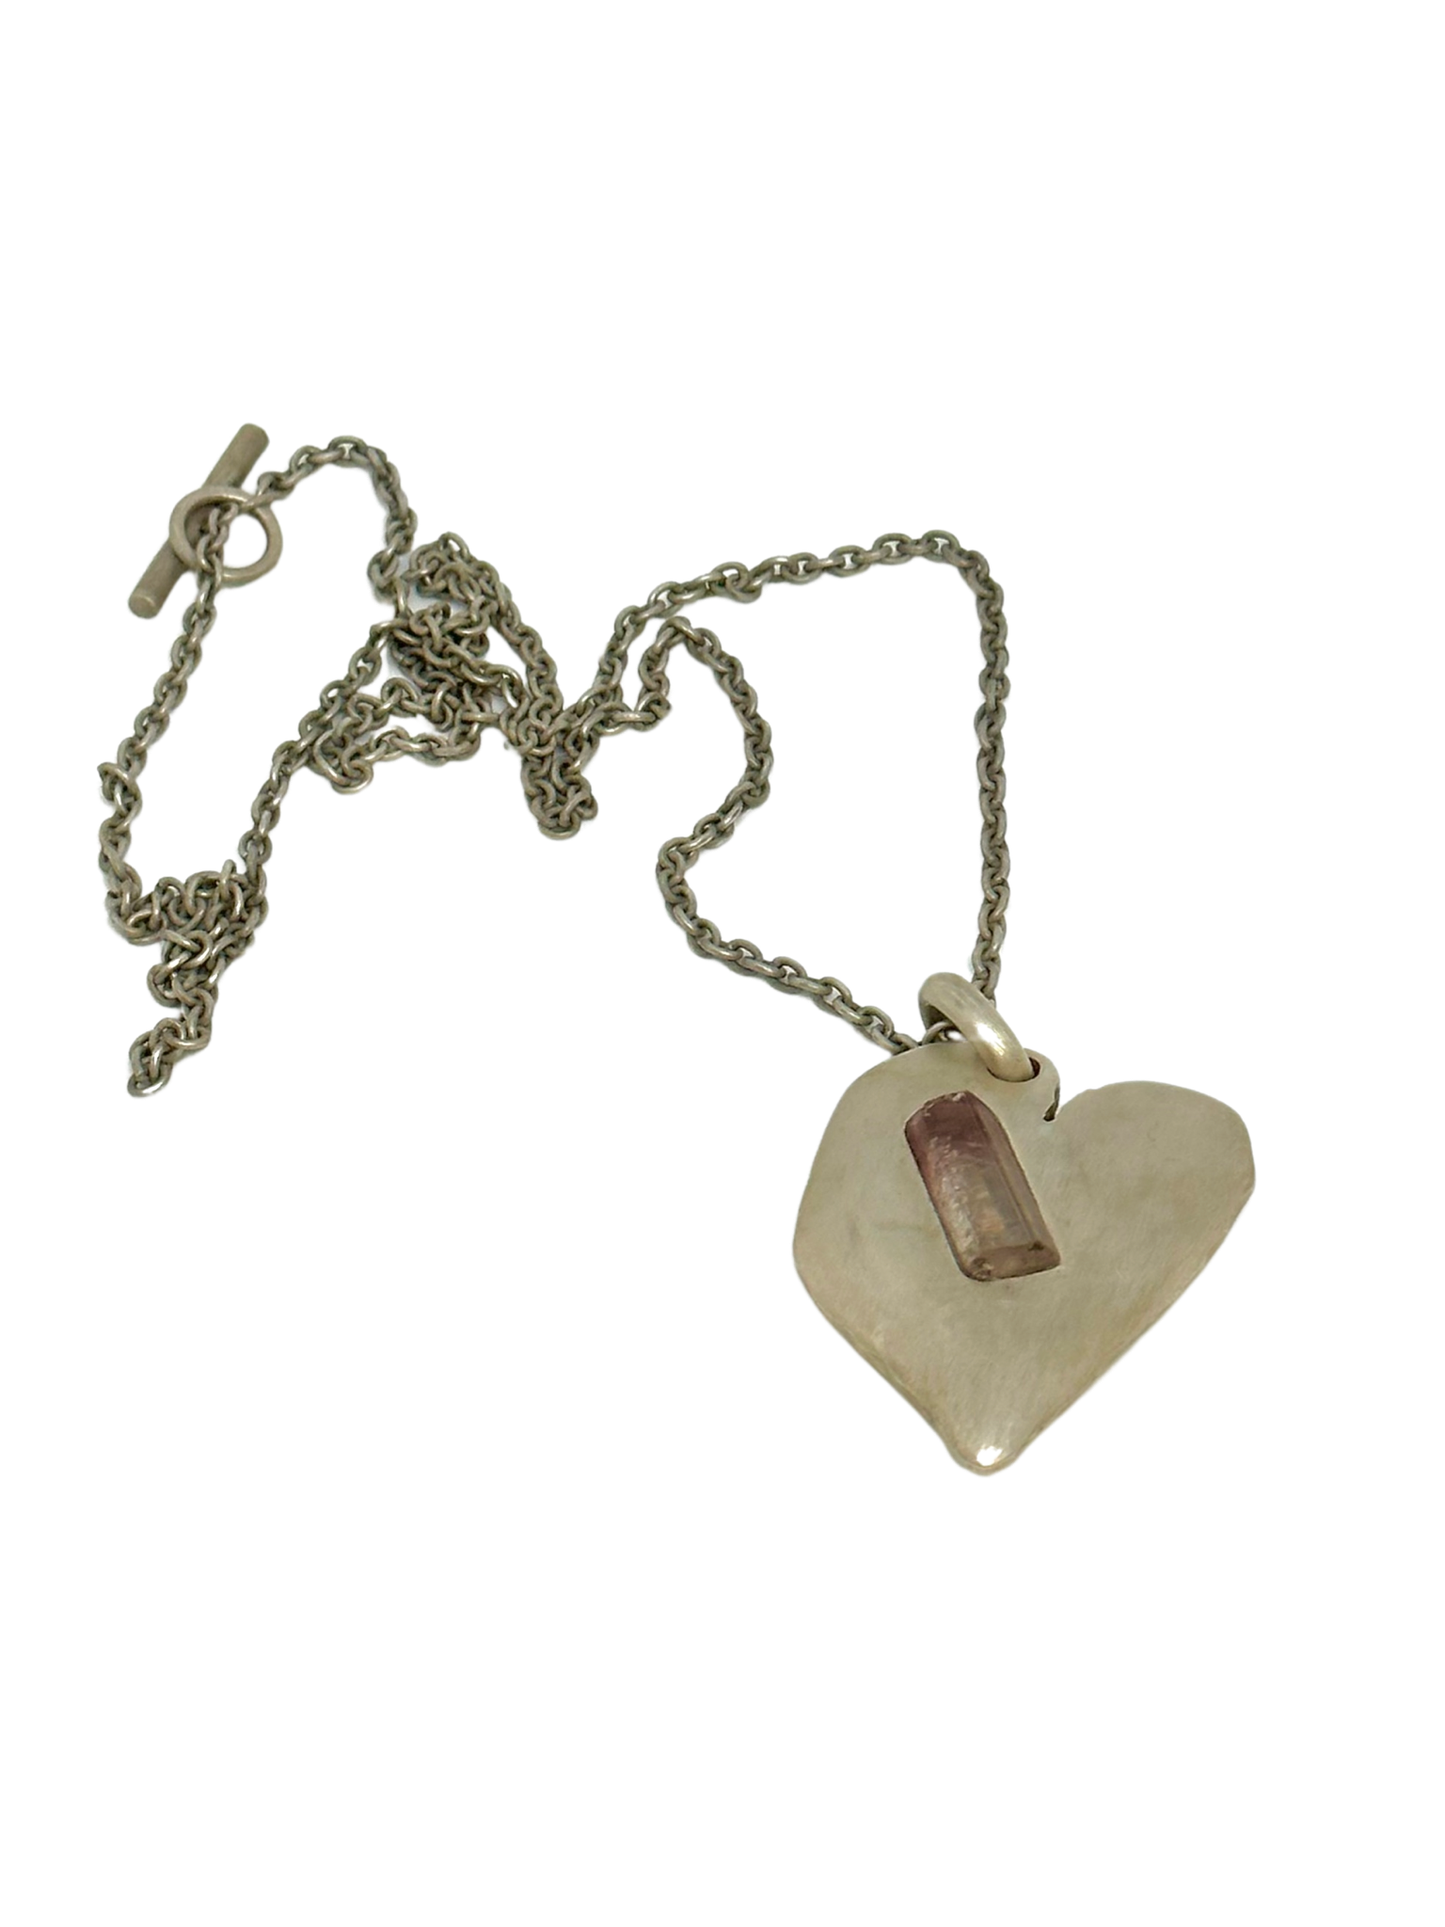 Parts of 4 Dirty Sterling Heart Necklace